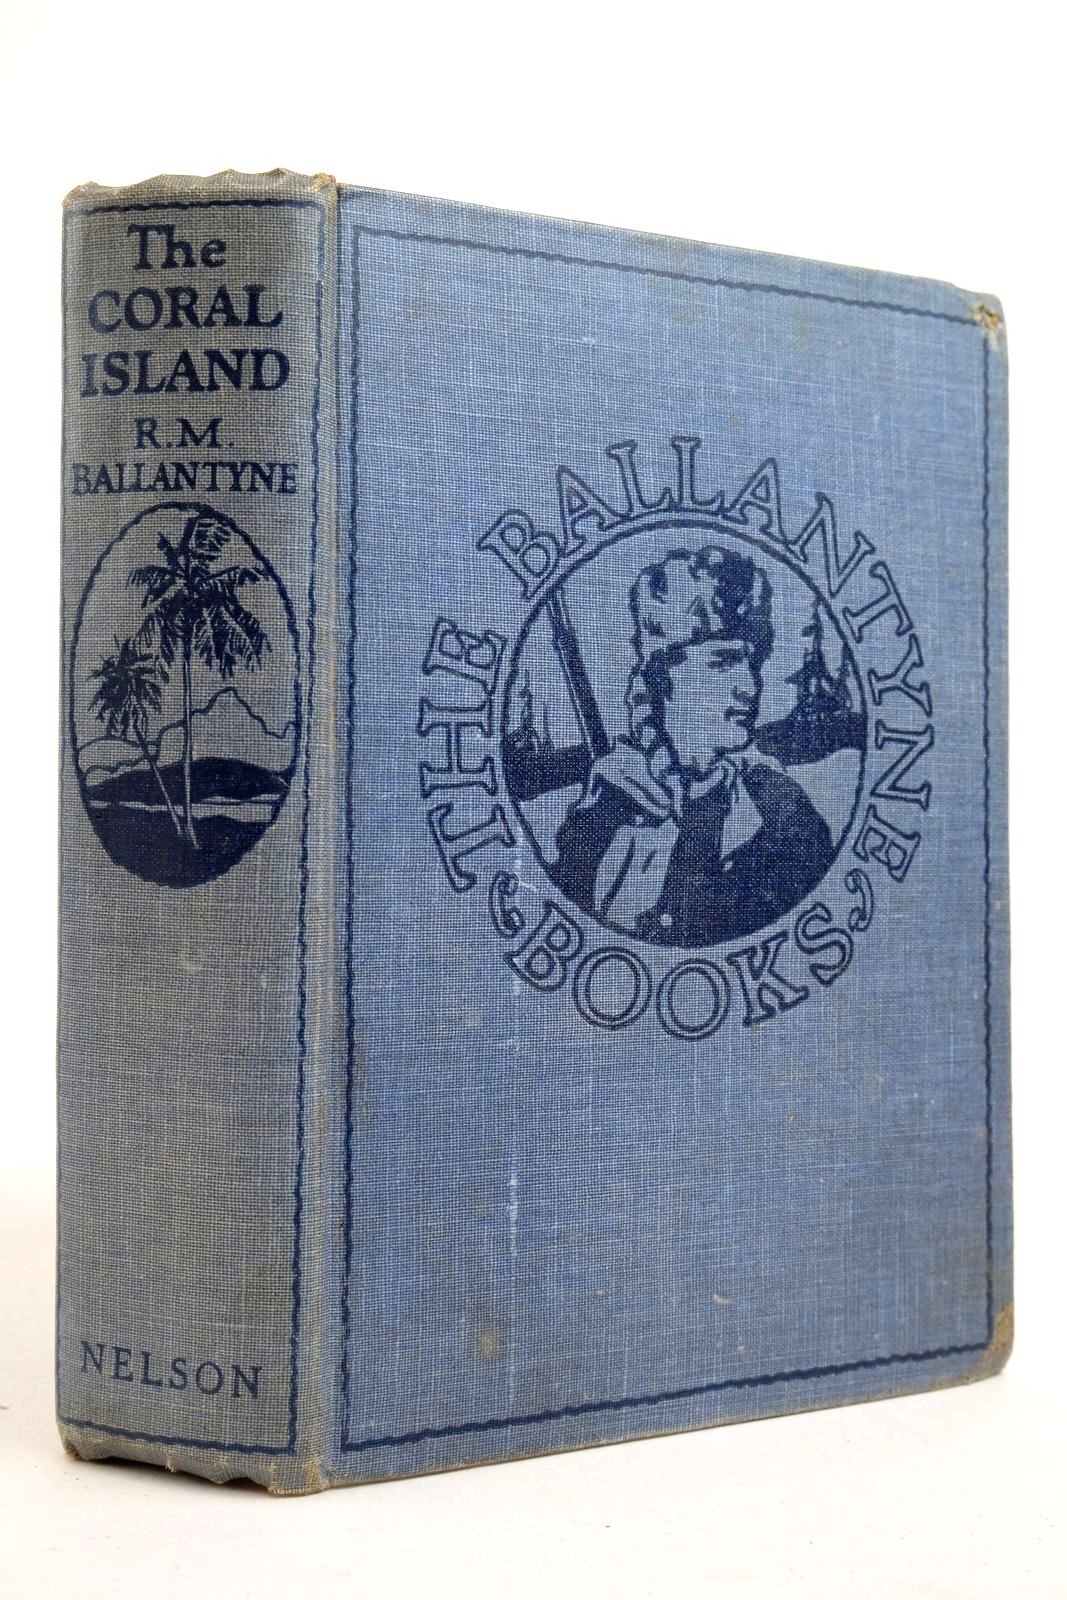 Photo of THE CORAL ISLAND written by Ballantyne, R.M. published by Thomas Nelson and Sons Ltd. (STOCK CODE: 2134980)  for sale by Stella & Rose's Books